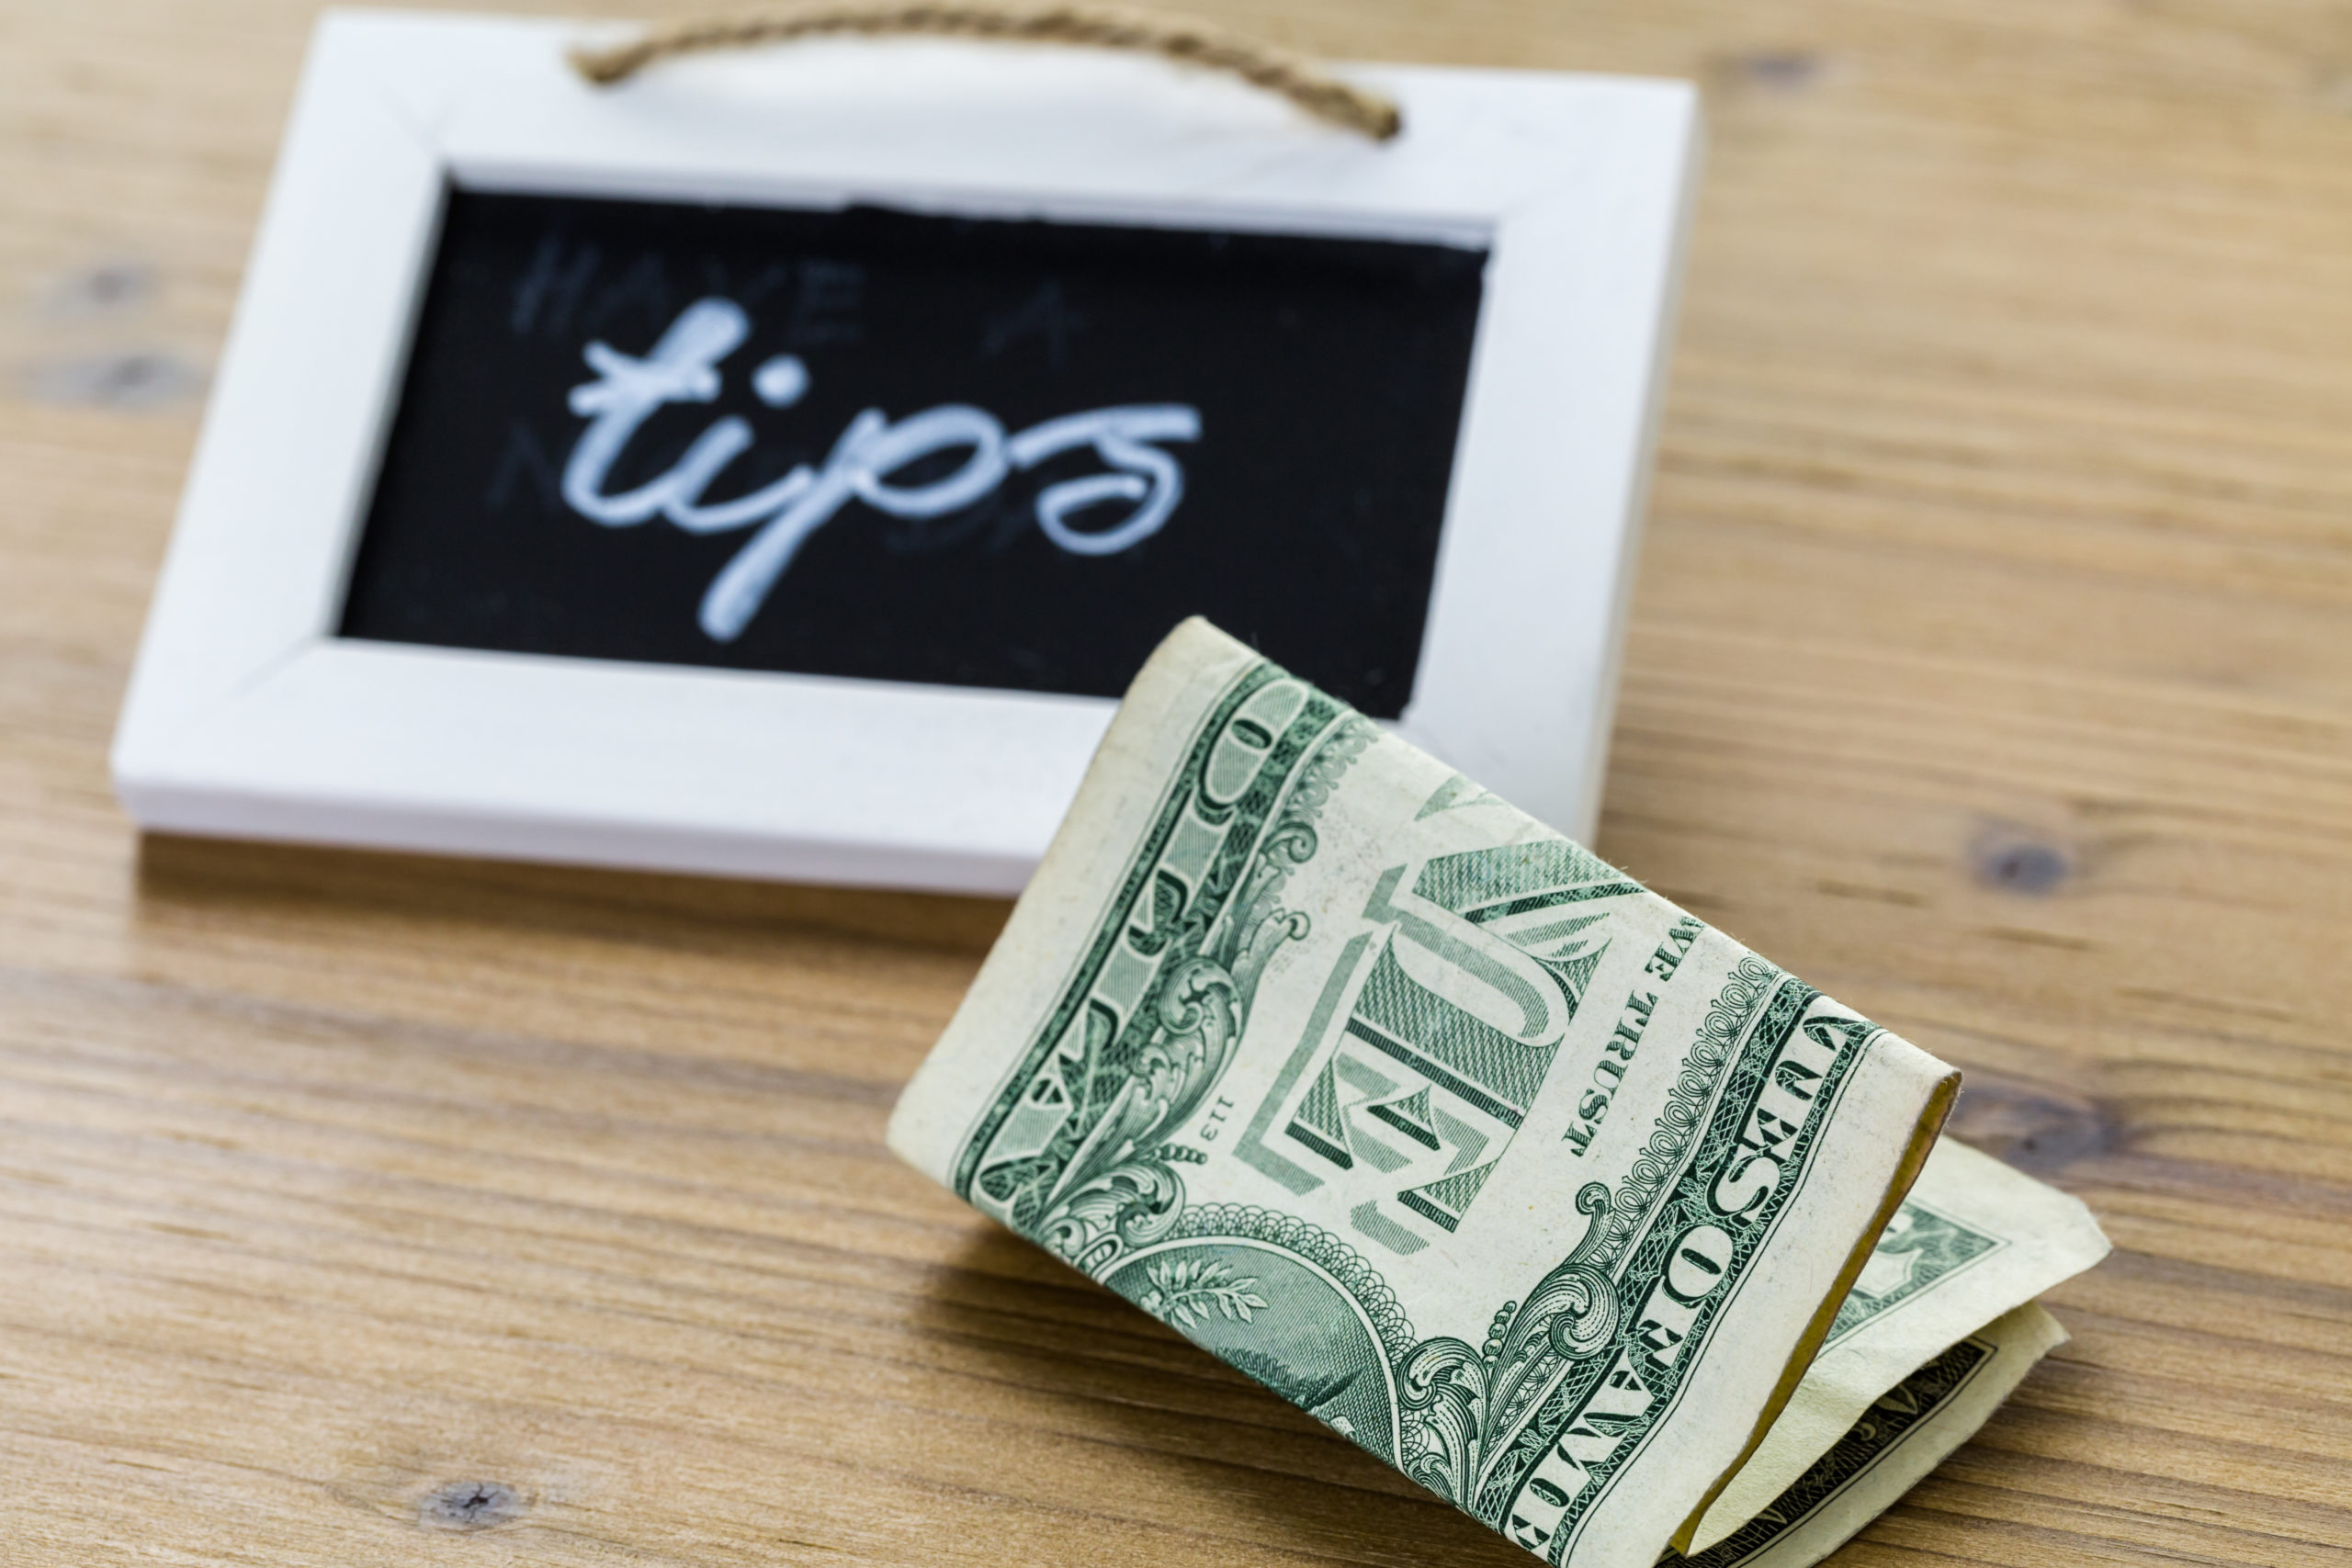 WISE Industry 2020 Tipping Survey Analysis